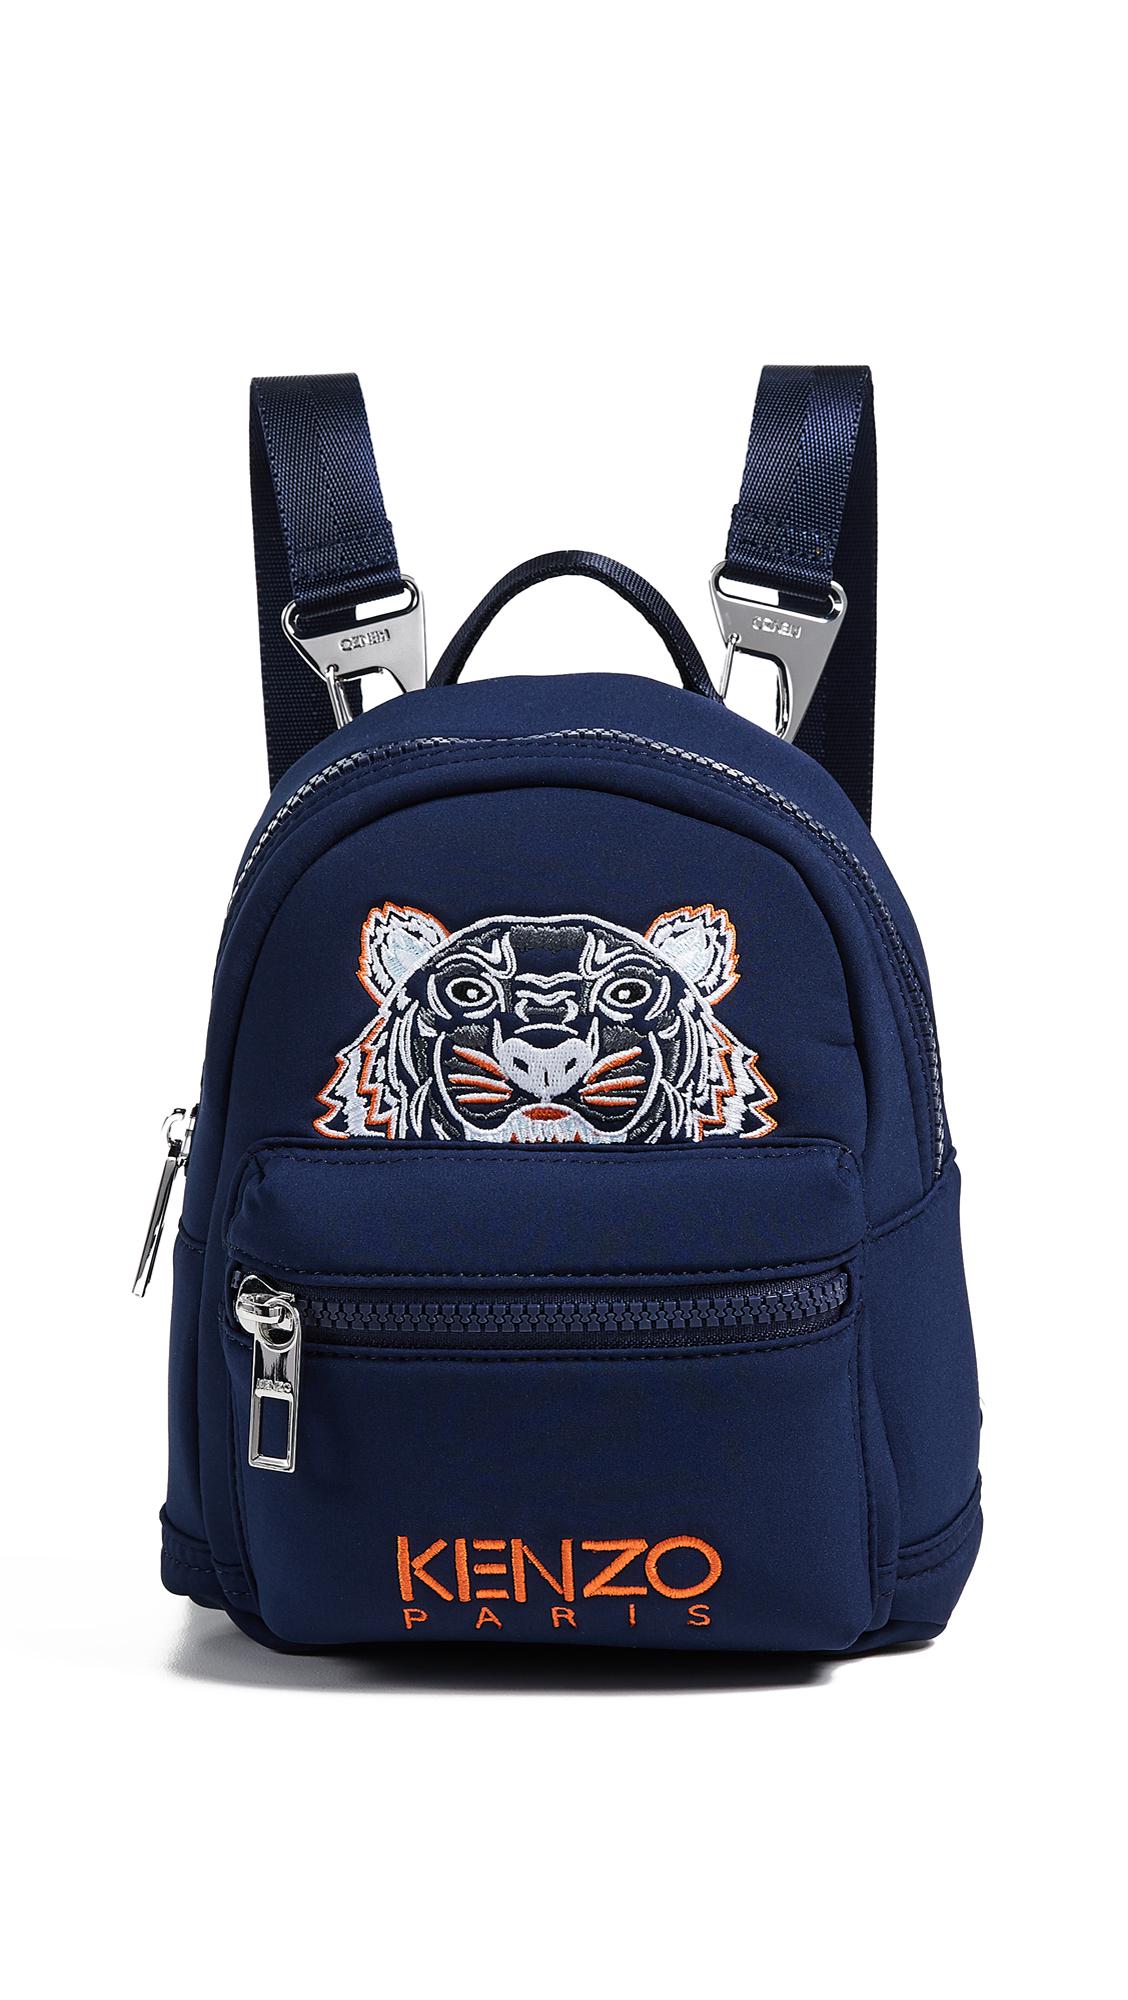 Kenzo Backpack Canada | vlr.eng.br